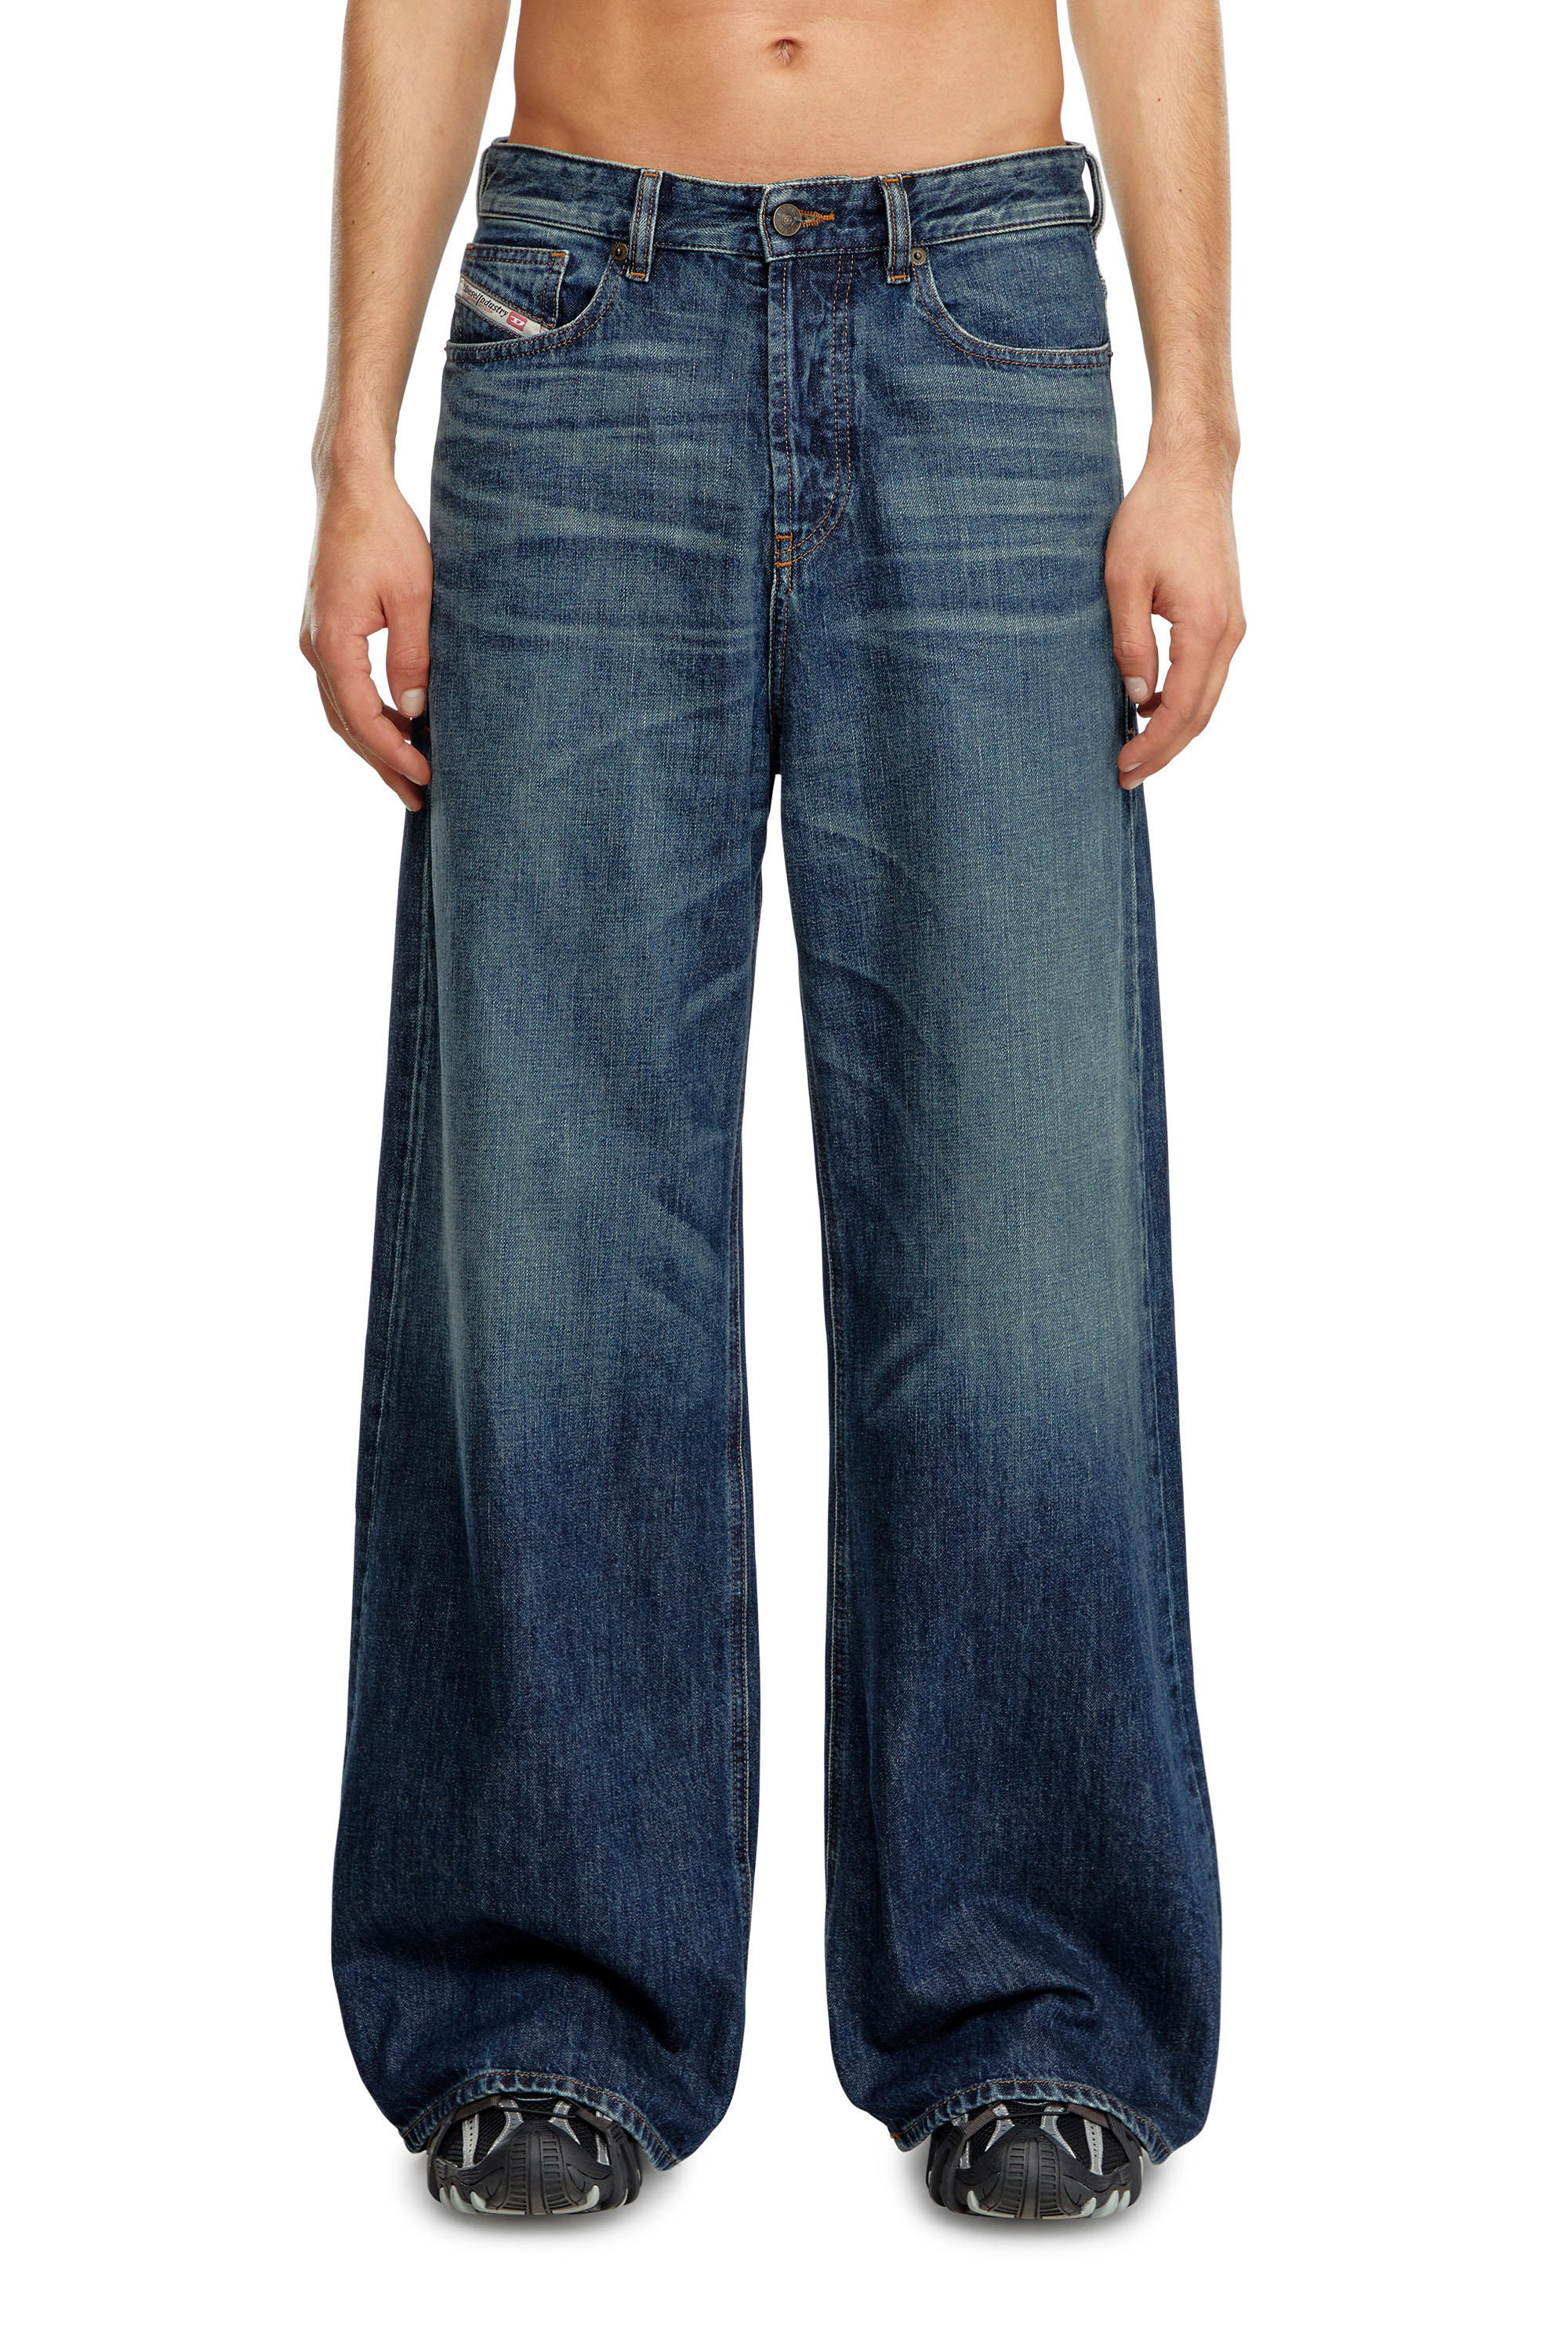 Diesel - Straight Jeans 1996 D-Sire 09H59, Mujer Straight Jeans - 1996 D-Sire in Azul marino - Image 5